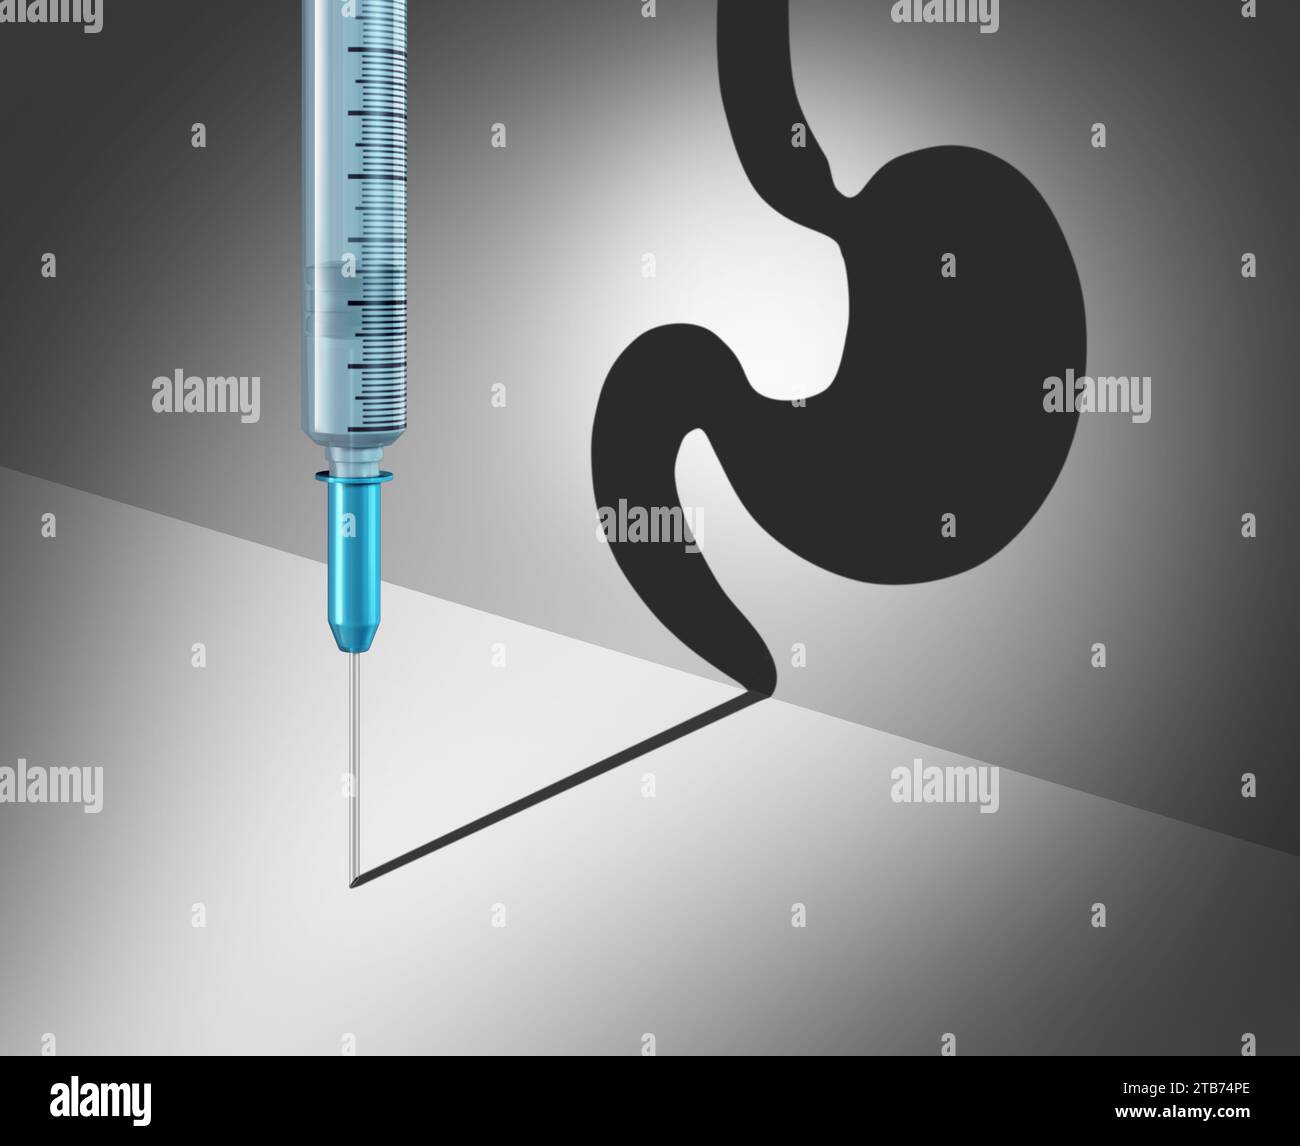 Obesity Management Medicine as a Hypodermic needle or syringe casting a shadow representing a stomach for reducing appetite and weight loss drug. Stock Photo